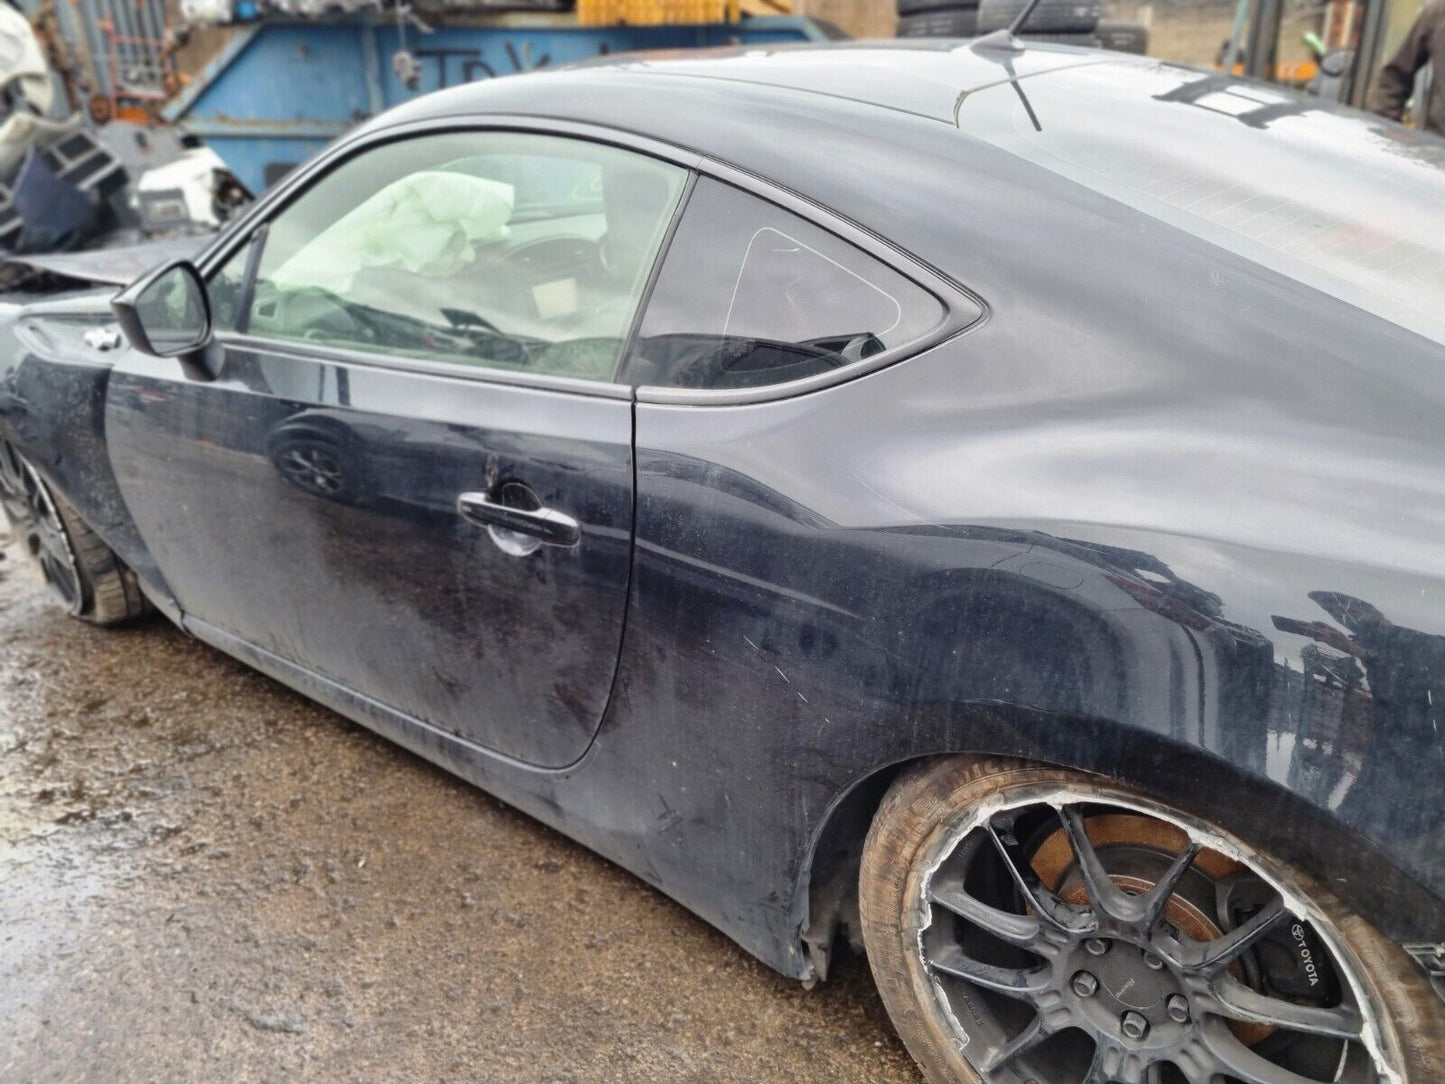 2013 TOYOTA GT86 GT1 D-4S 2.0 PETROL 6 SPEED MANUAL 2DR for PARTS & SPARES